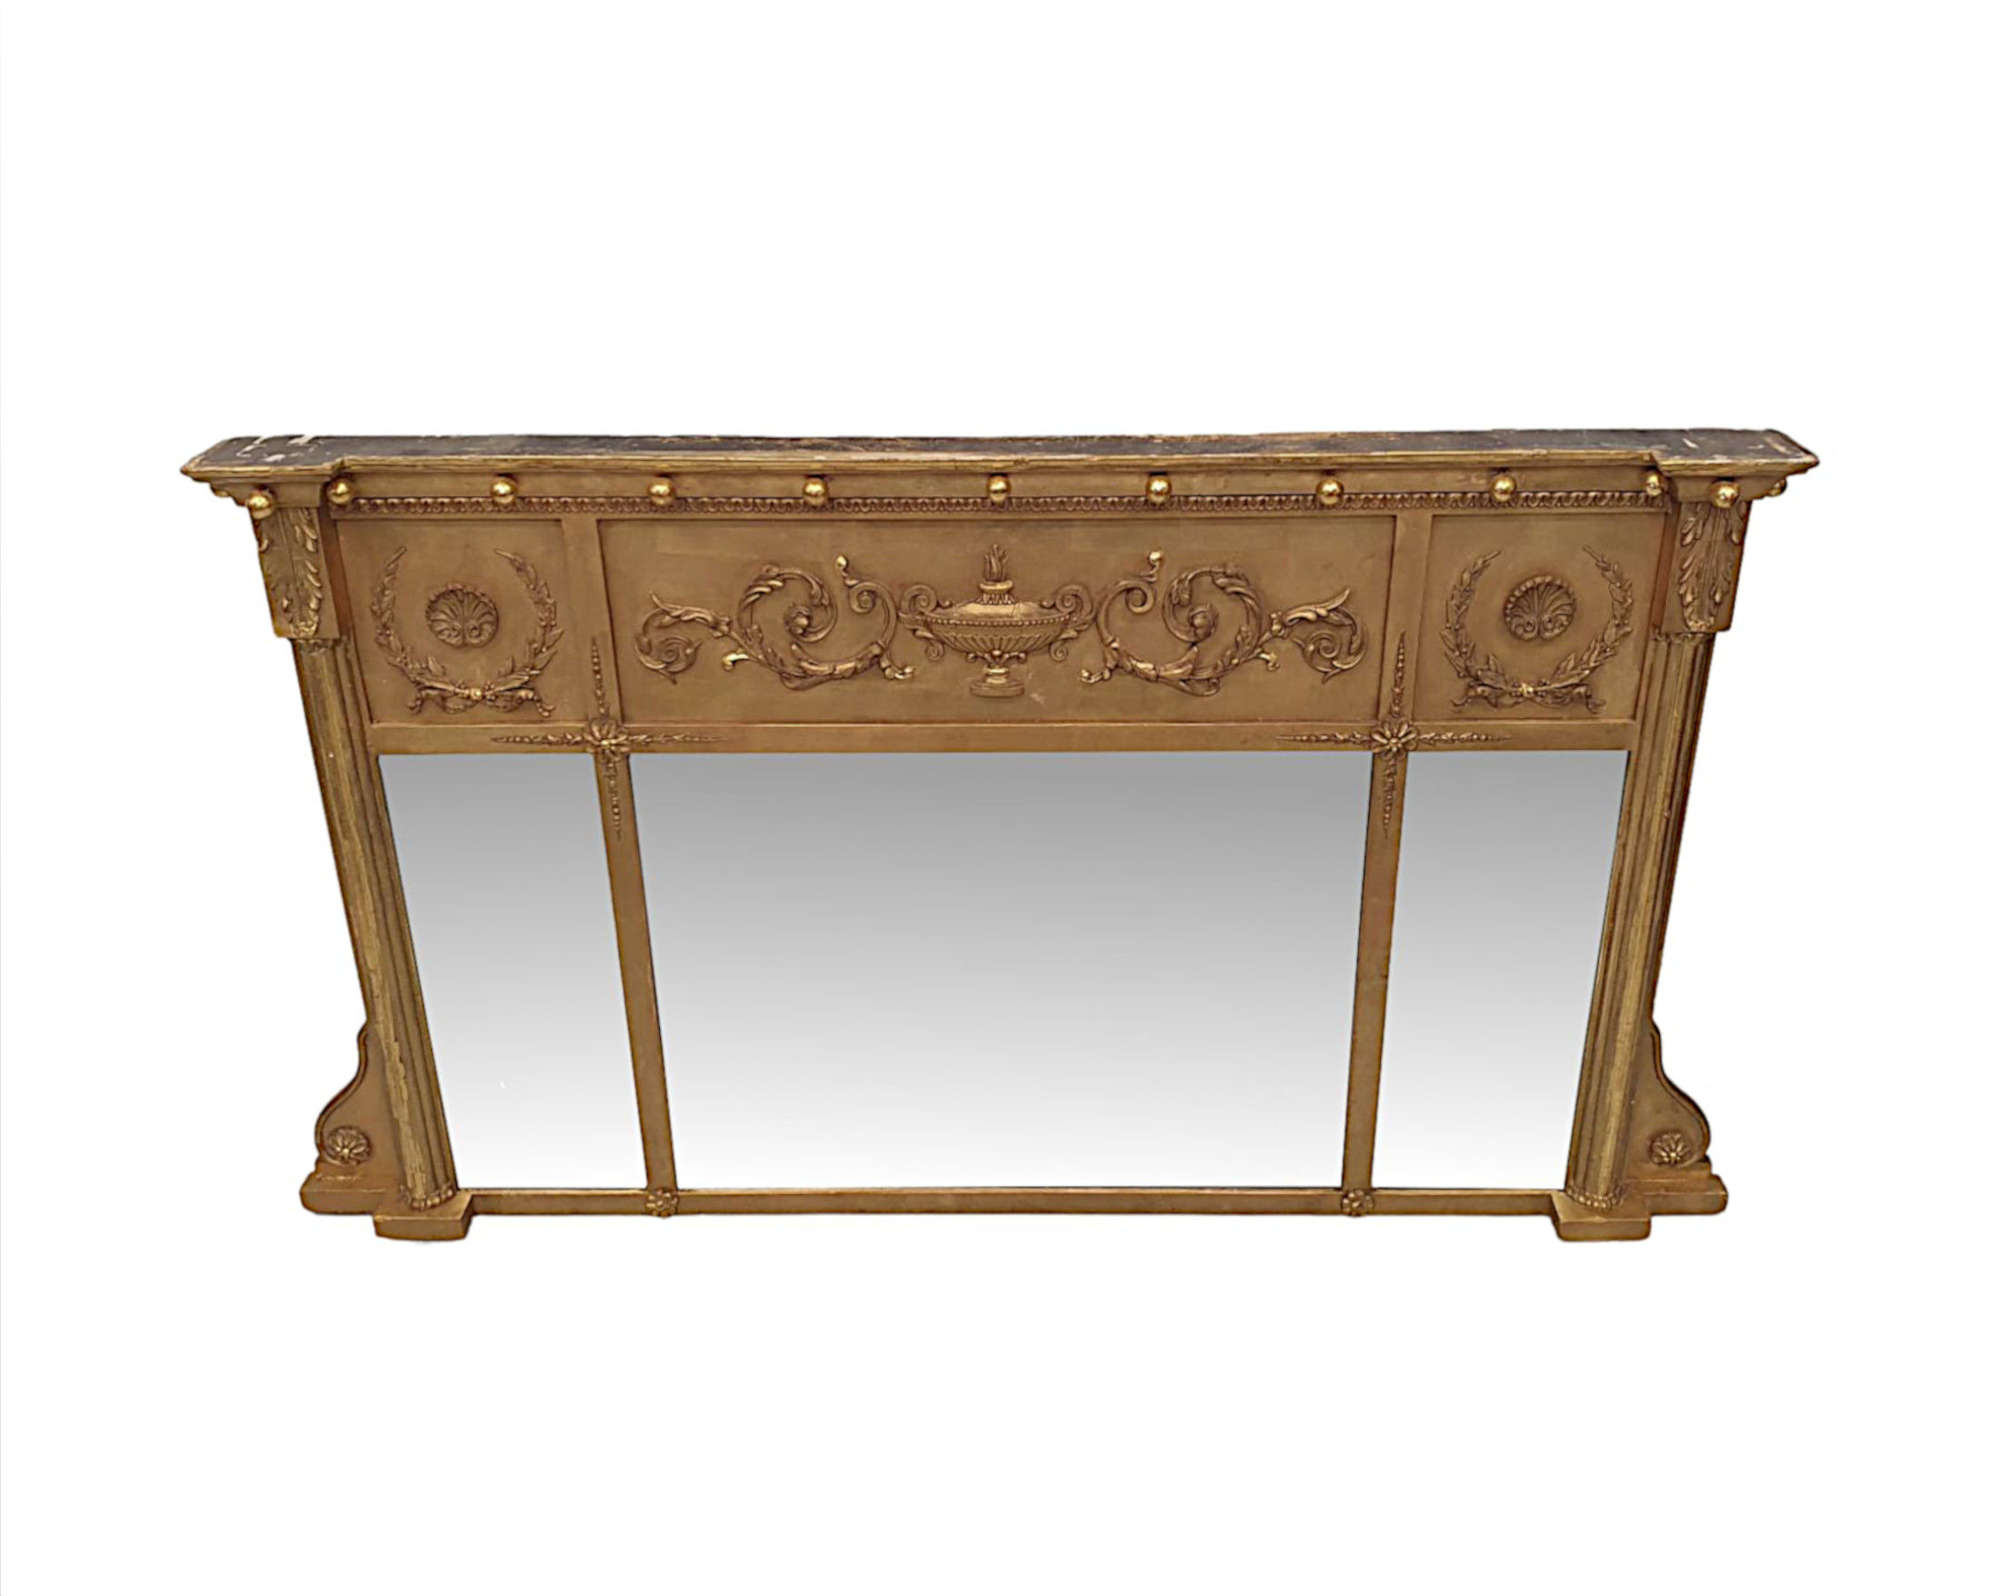 A Fabulous Edwardian Compartmantal Giltwood Antique Overmantle Mirror In The Manner Of Adams